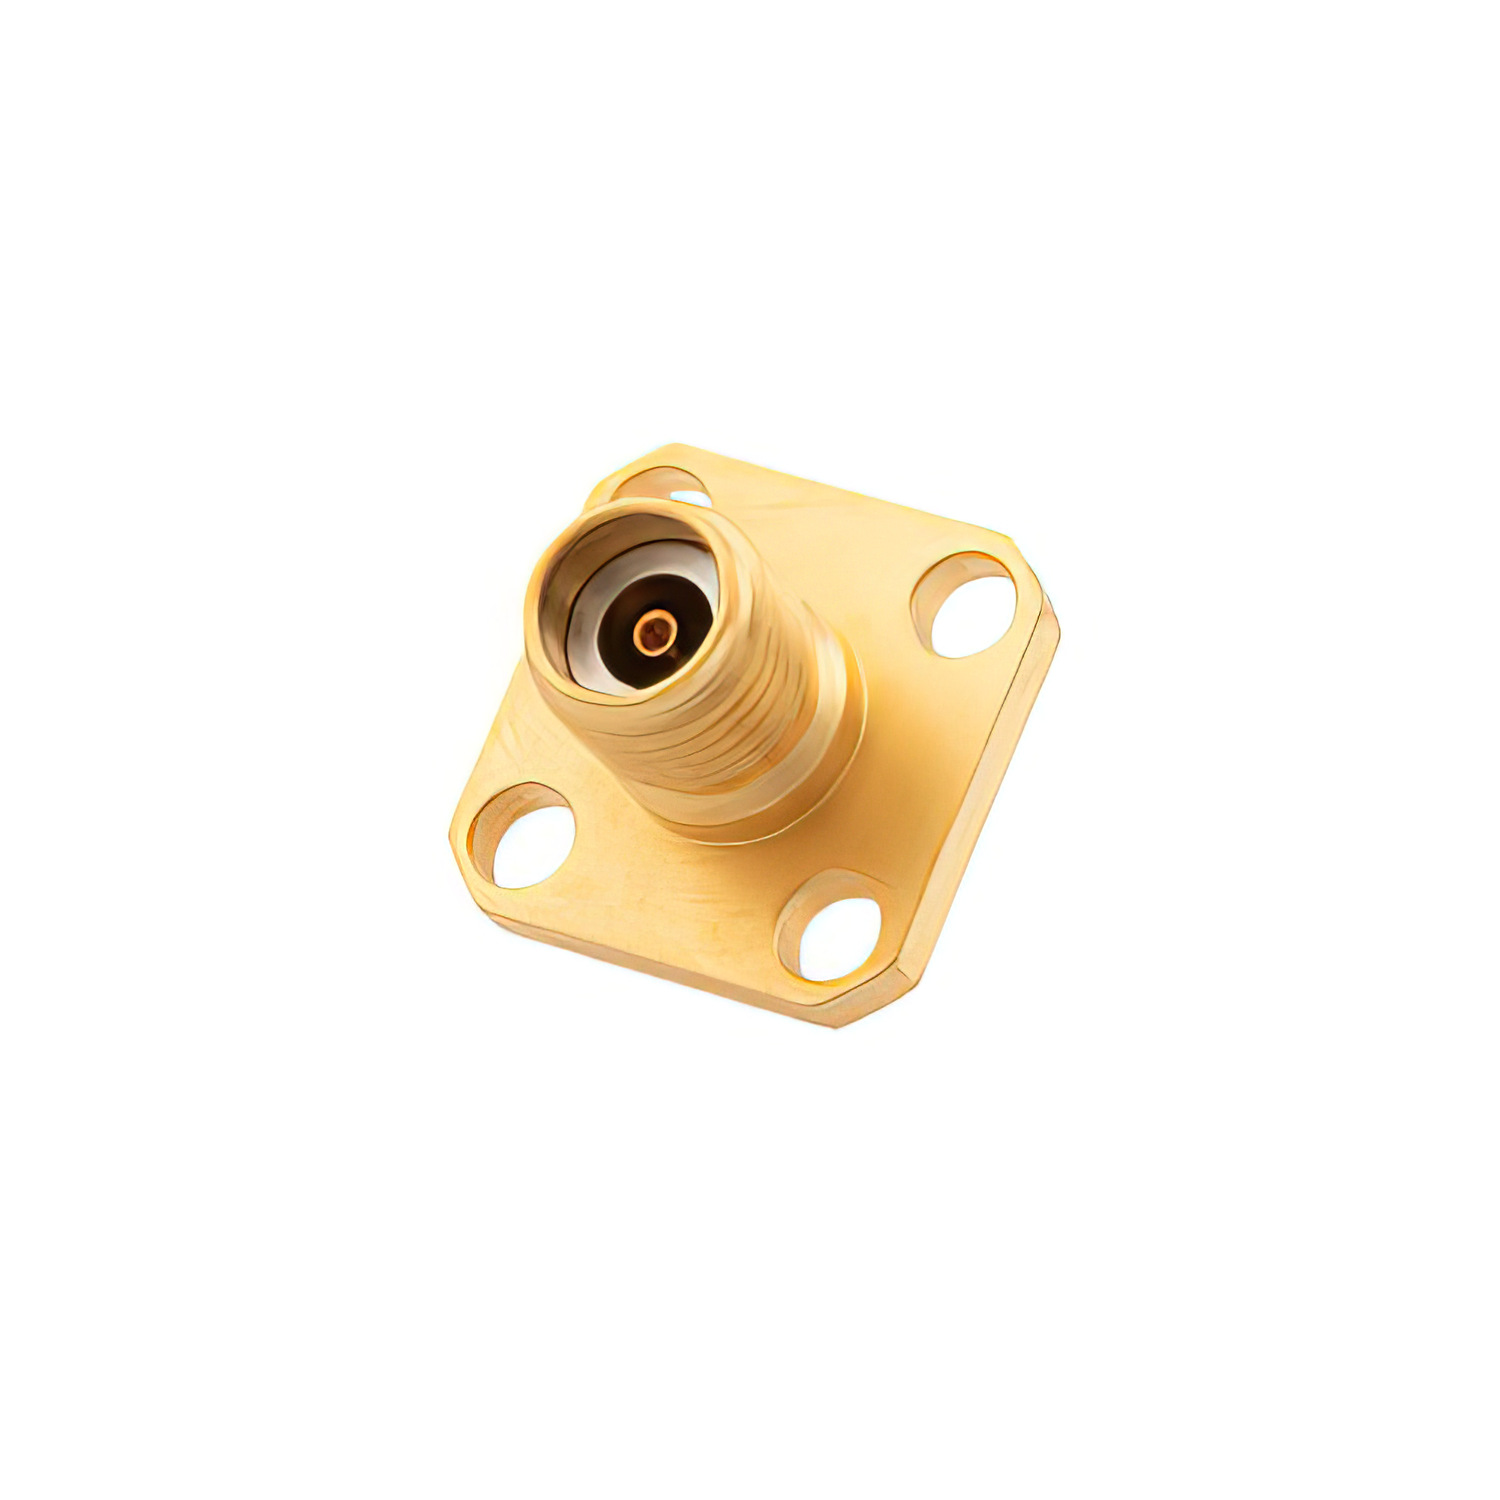 2.92mm Female Connector Solder Non-Solder Contact 4 Hole Flange Mount1